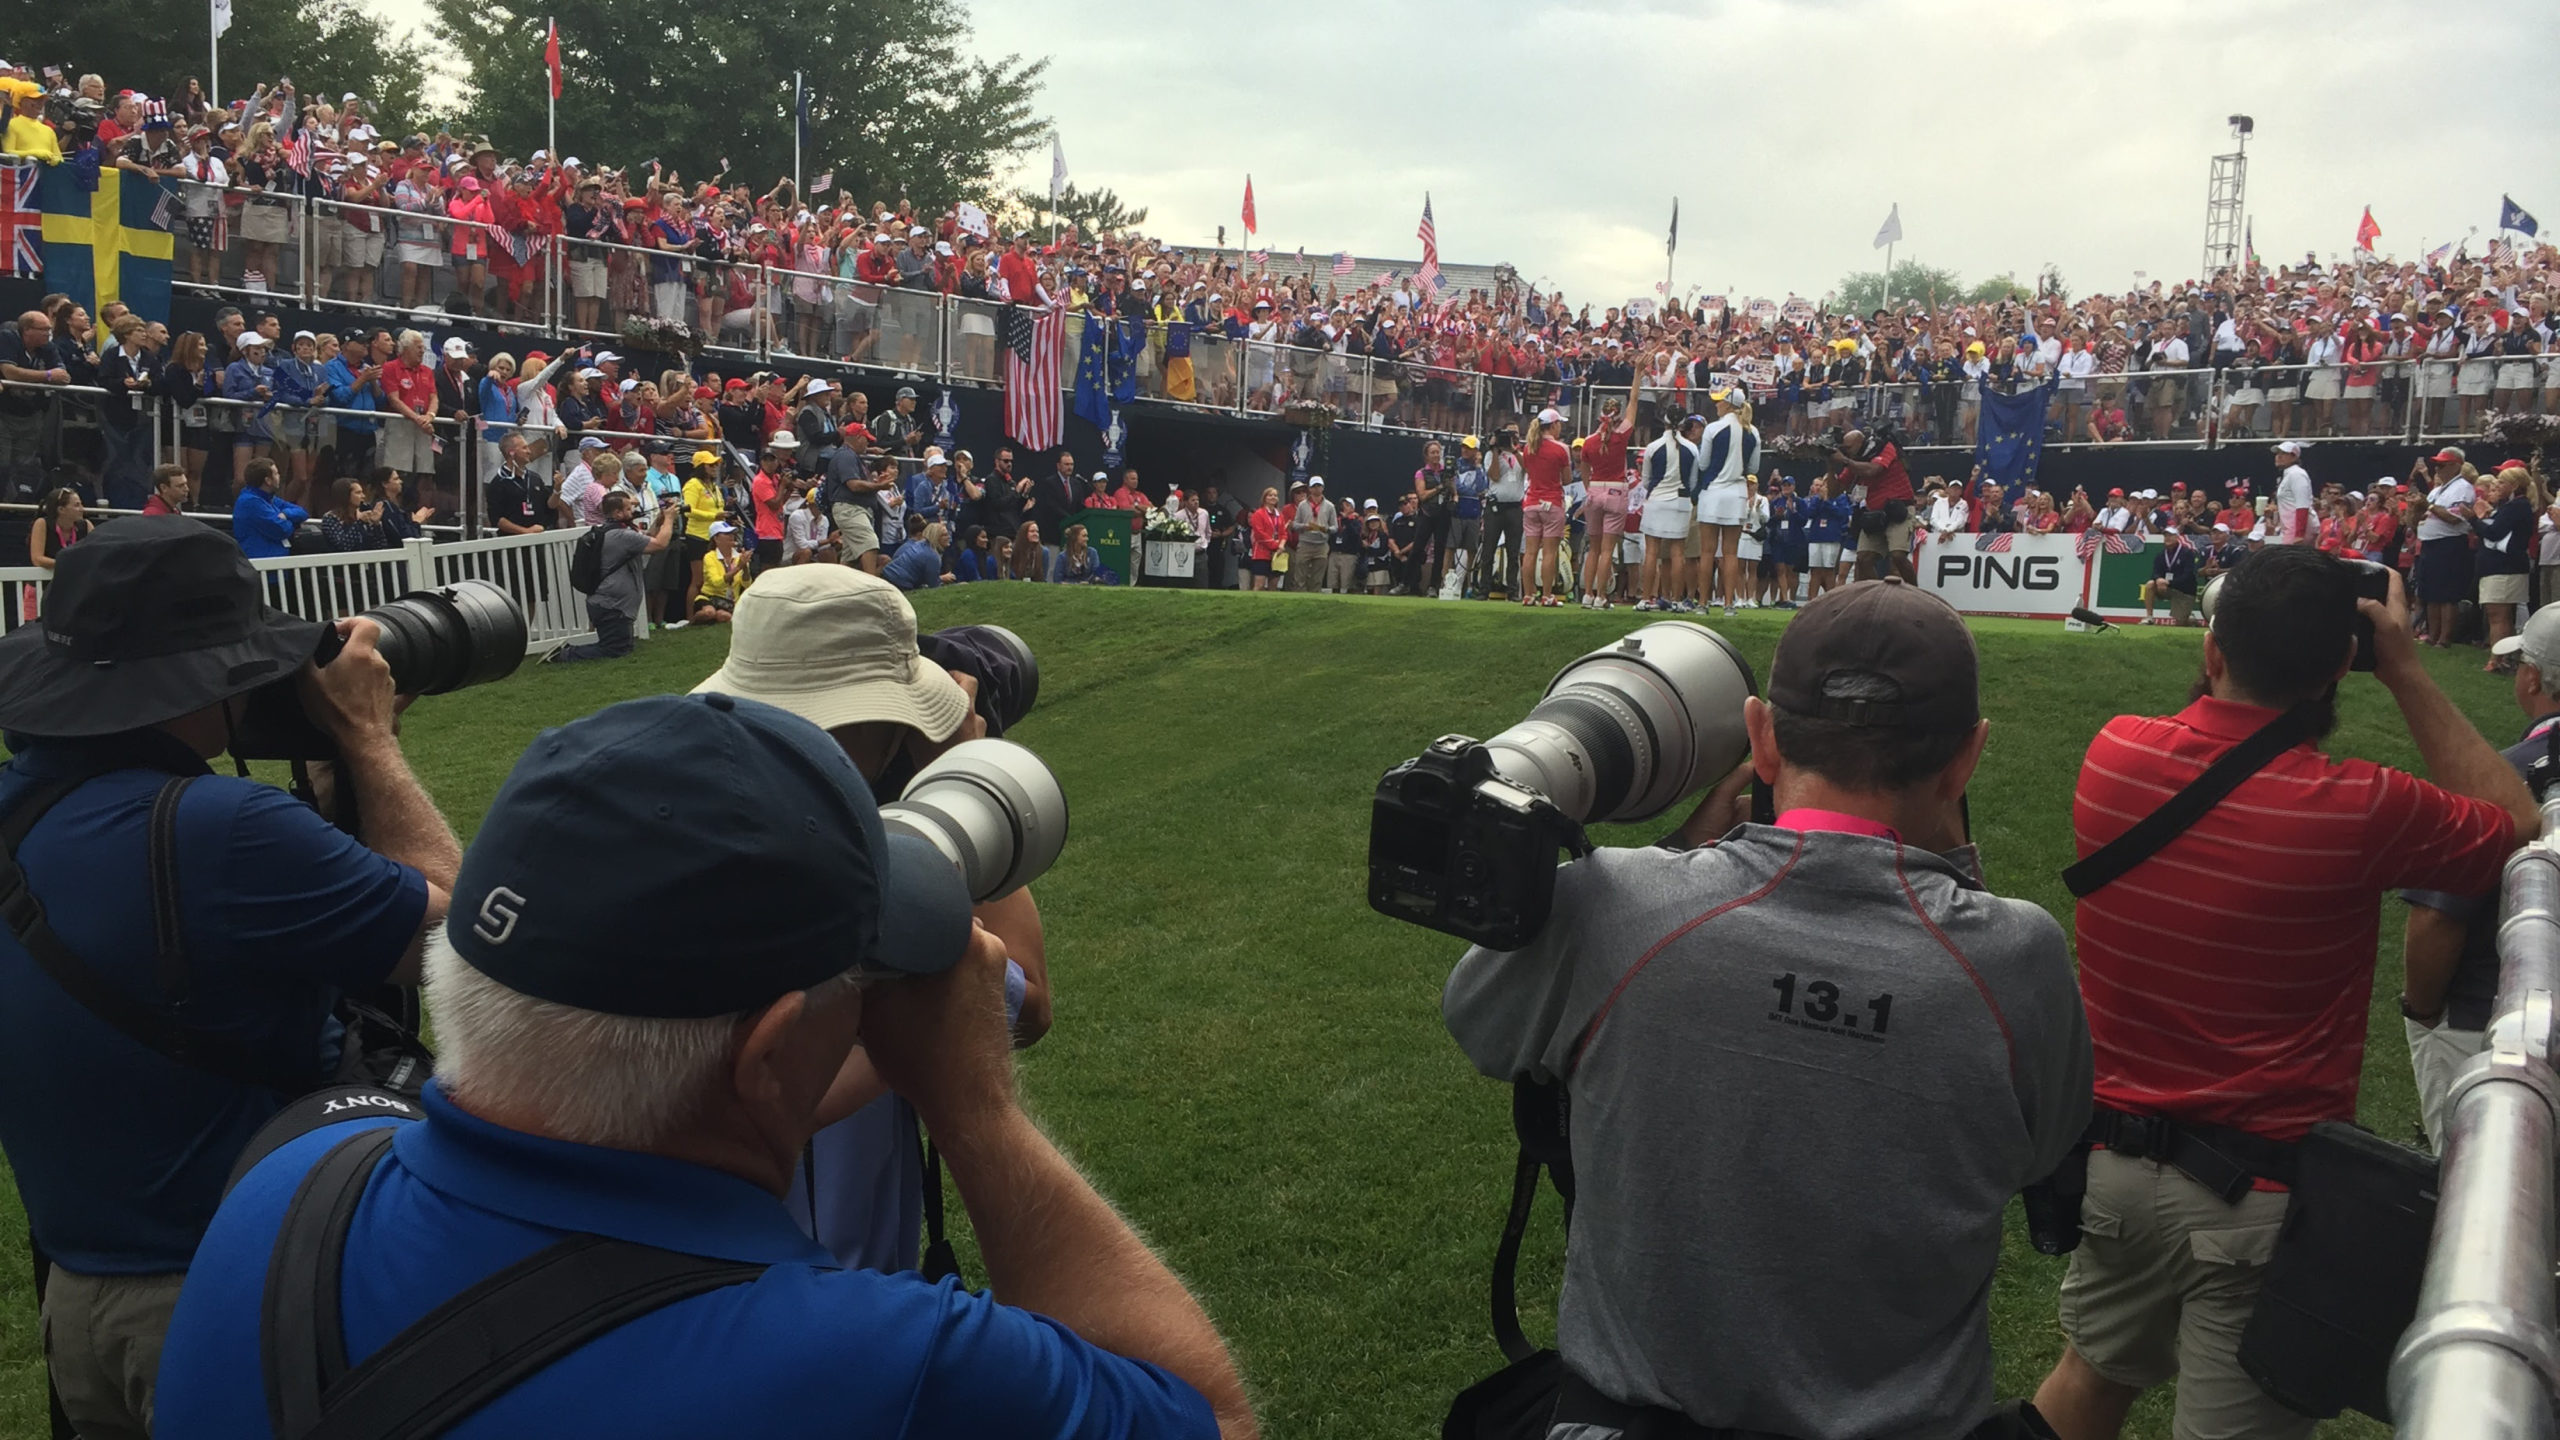 photographers at the Solheim Cup